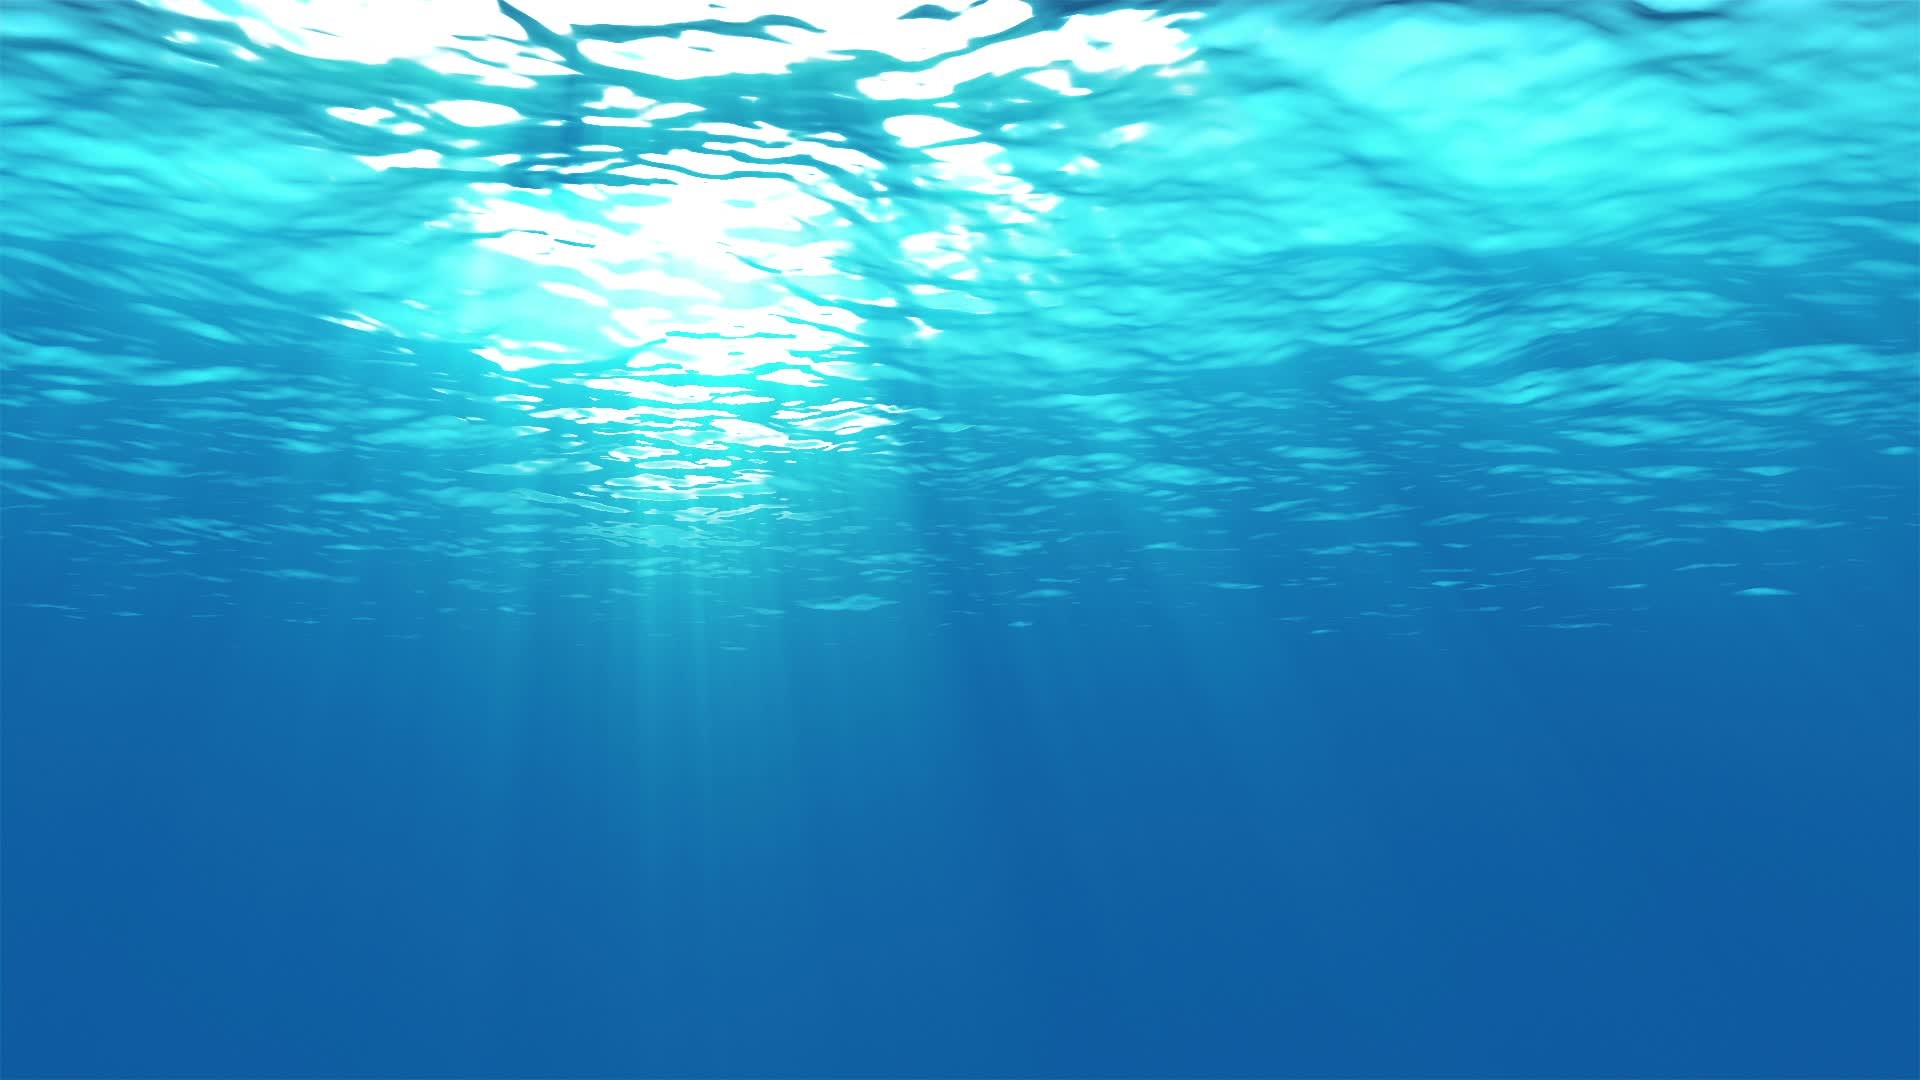 1920x1080 Awesome Underwater Scenes Images Collection: Underwater Scenes Wallpapers